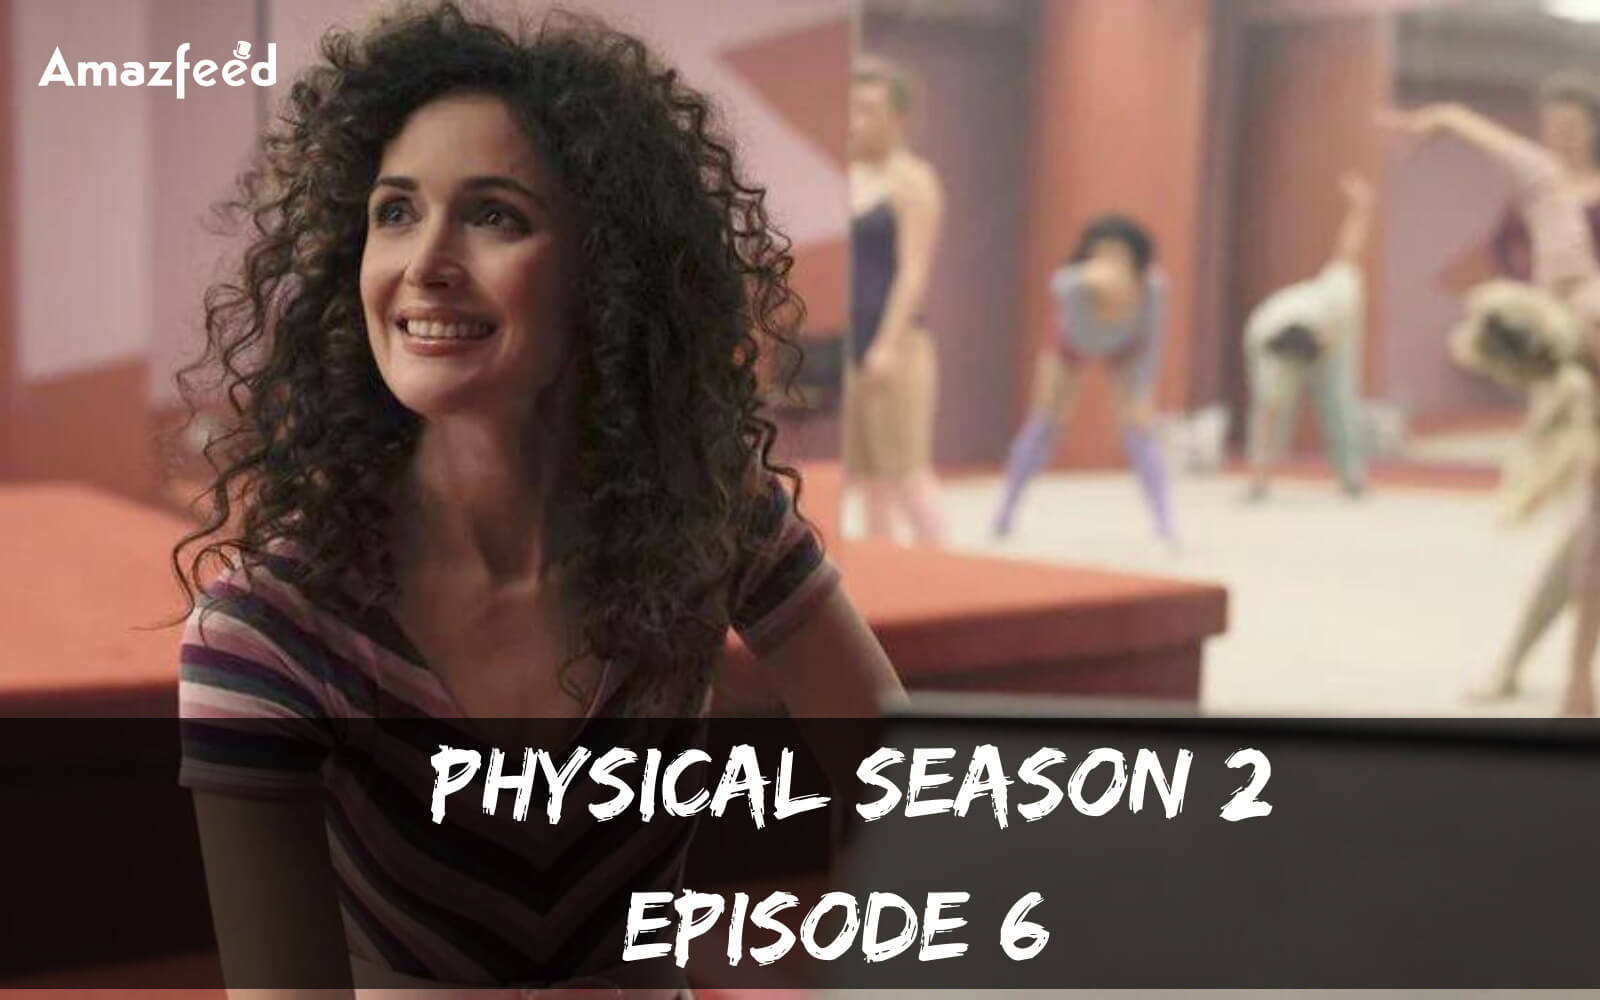 Physical Season 2 Episode 6 release date